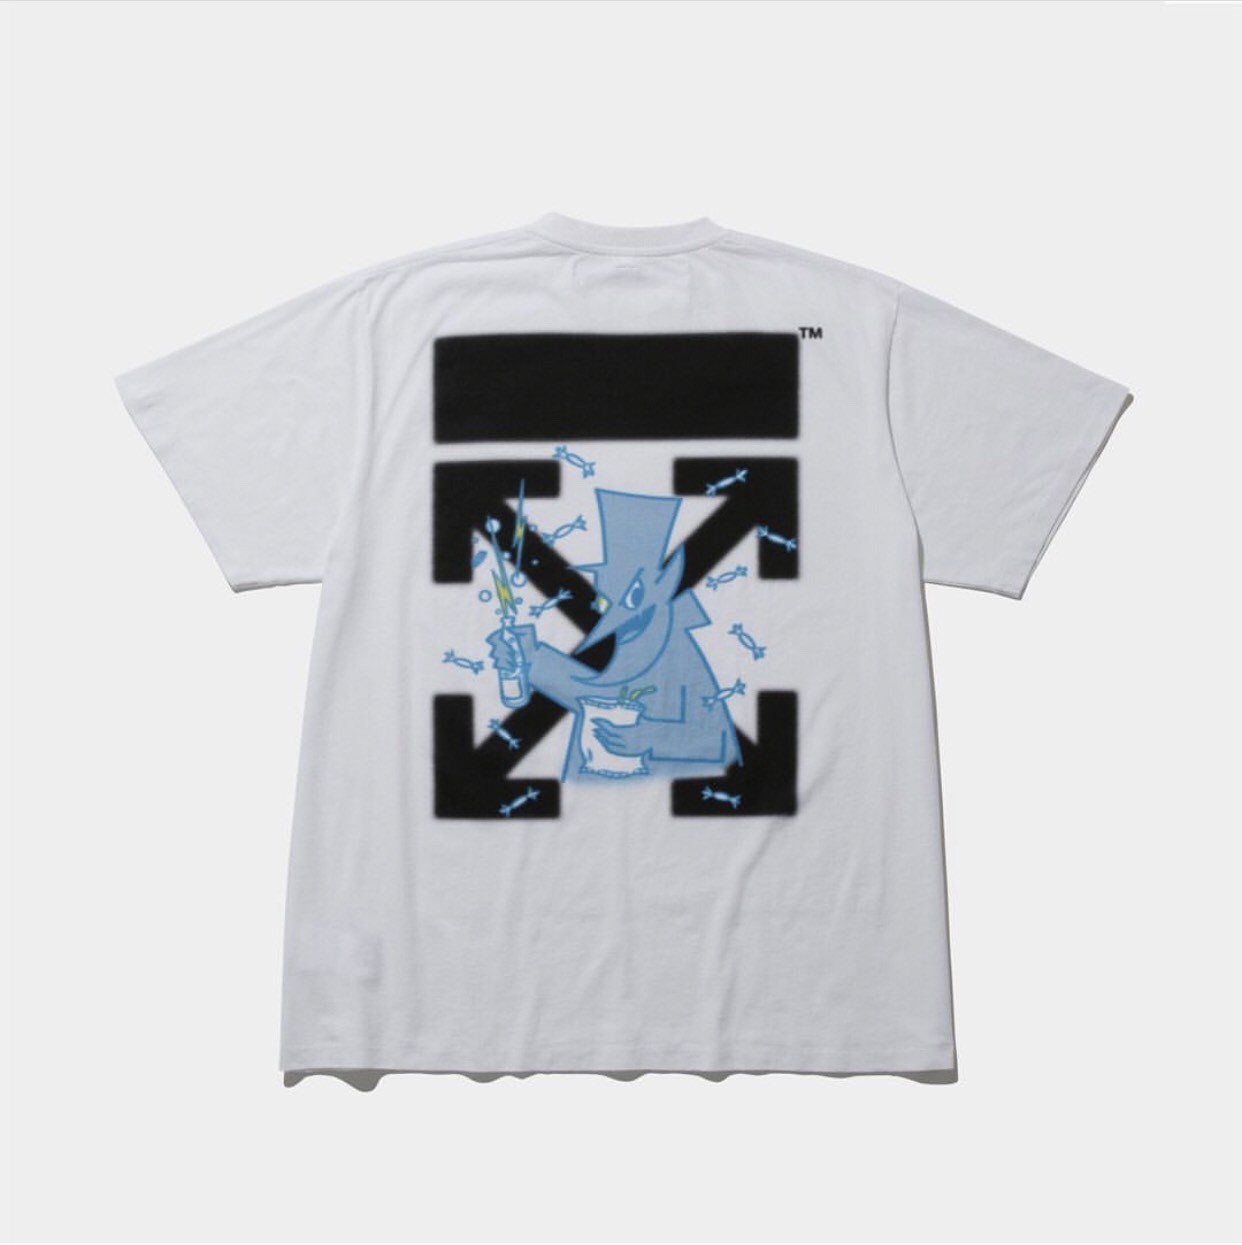 ▲Off-White X Fragment Design「CEREAL」T-Shirt系列。（圖／翻攝自IG@theconveni）